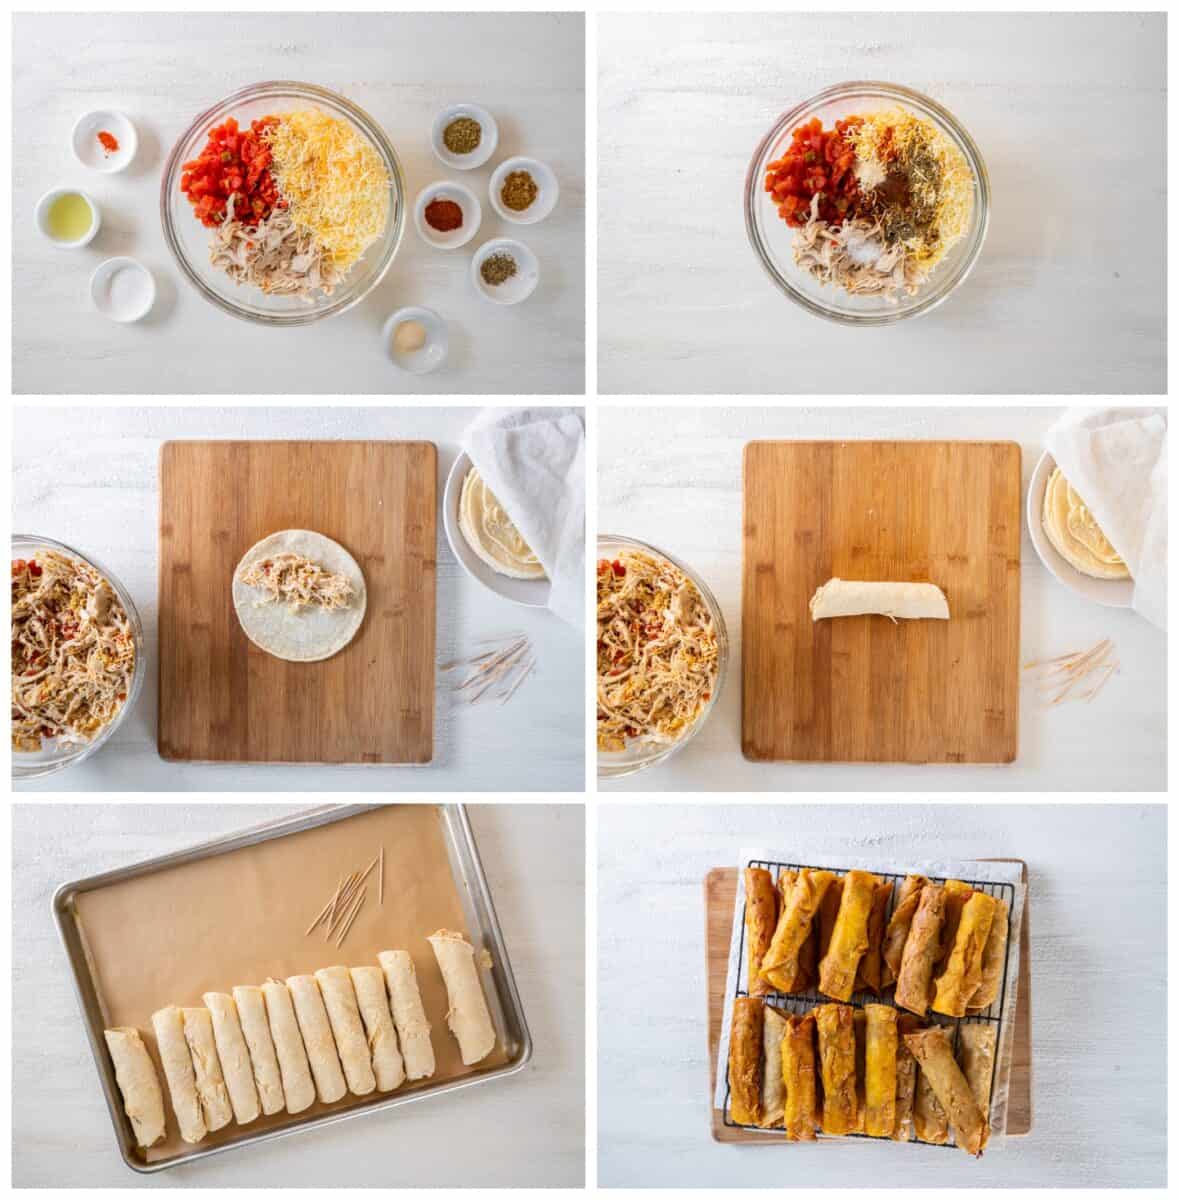 how to make fried chicken taquitos step by step photo instructions